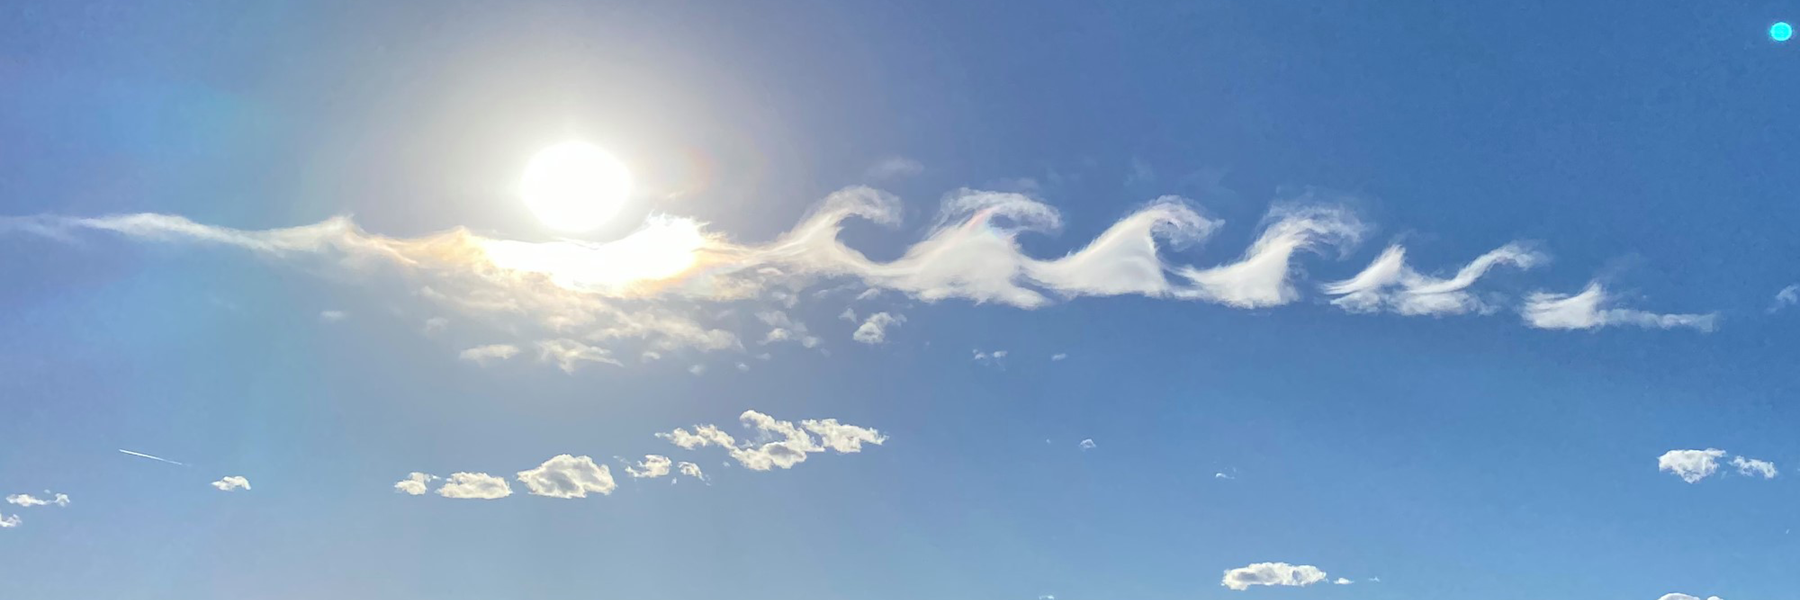 Blue sky with sun and wave clouds, link to article